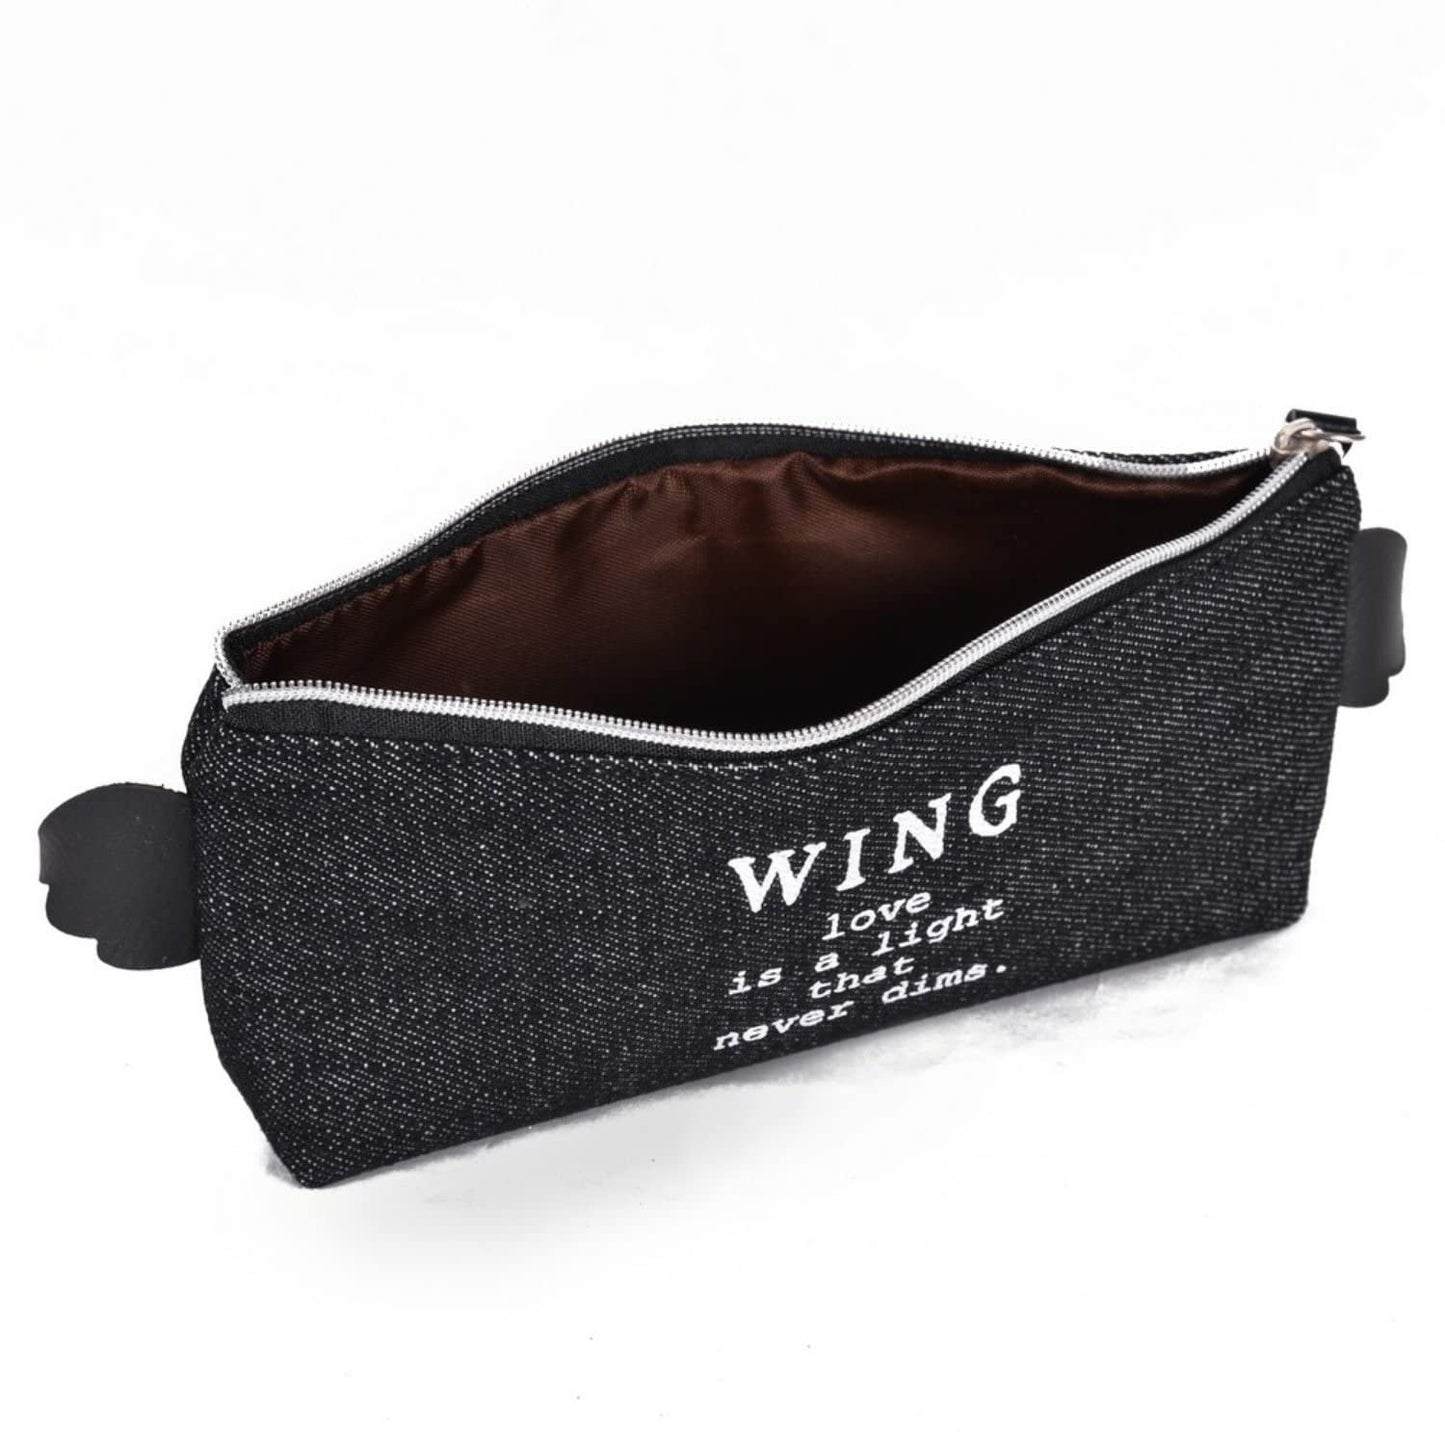 Ondesk Essentials Jeans Wing Love Pencil Pouch | Large Pencil Pen Case with Zipper Closure | Student School Supplies | Office Stationery Pen Storage Bag | Black, Pack Of 1